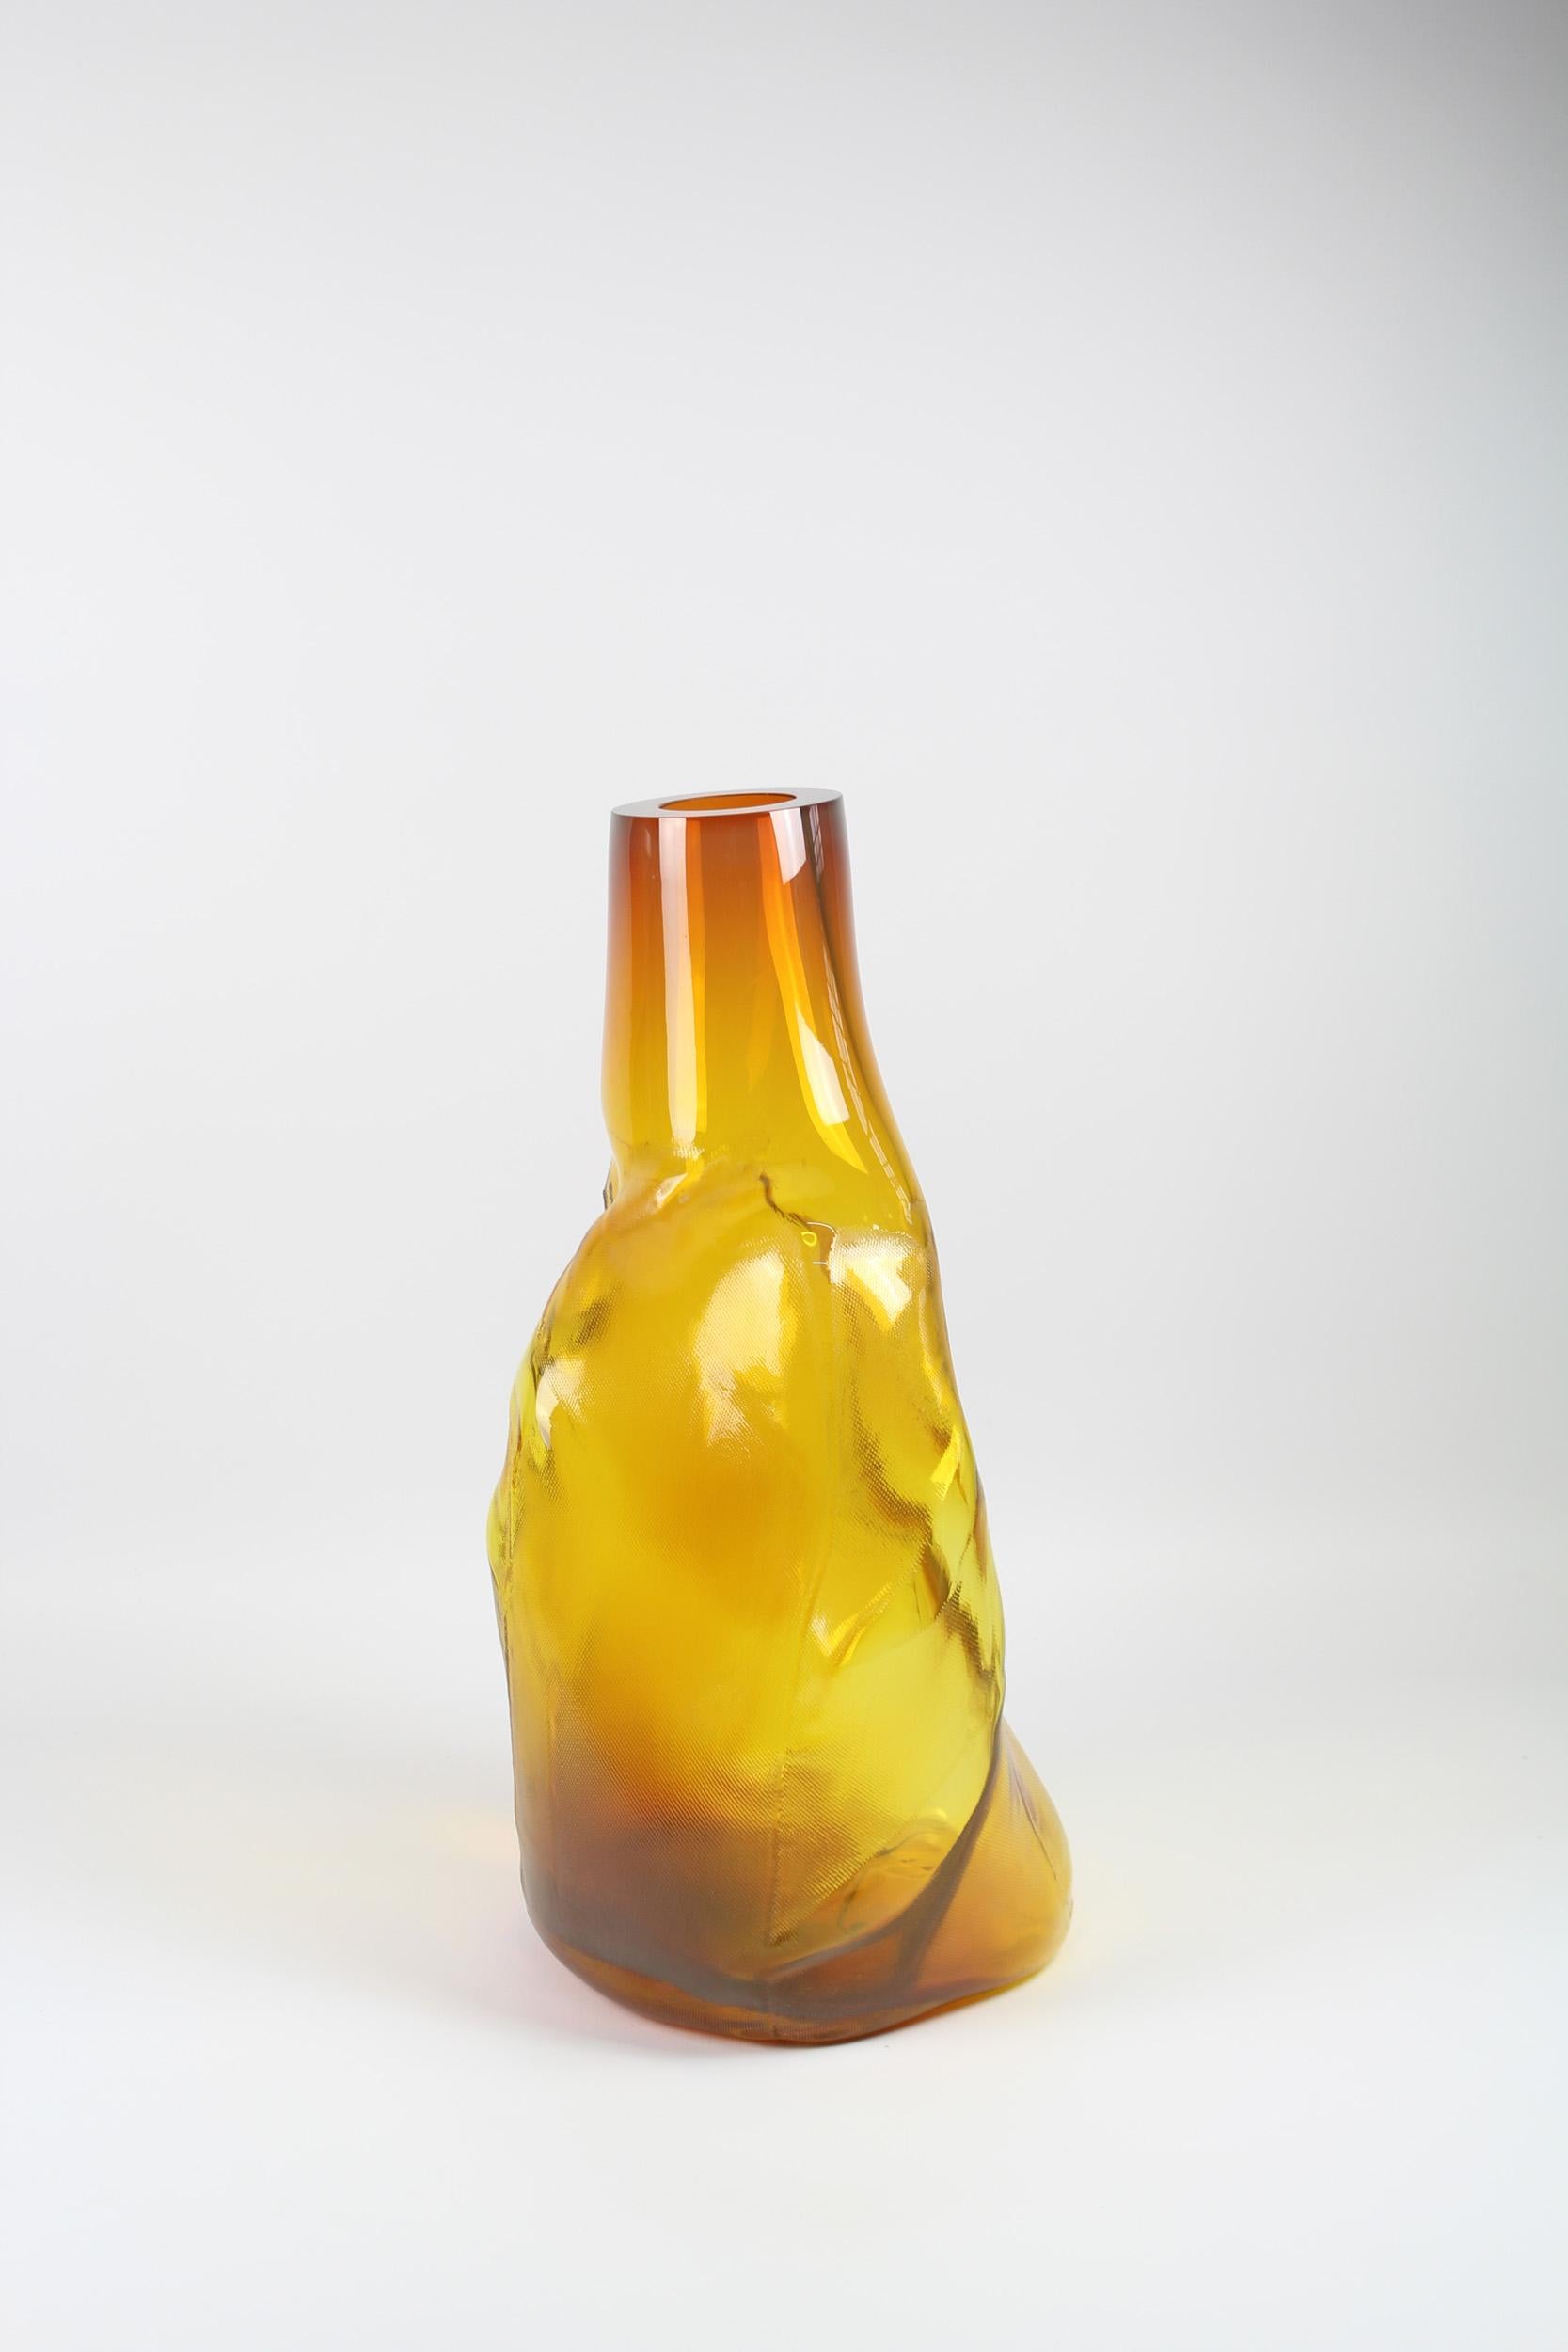 Swedish 105 Ltr Forms, Brilliant Gold, Handmade Glass Object by Vogel Studio For Sale